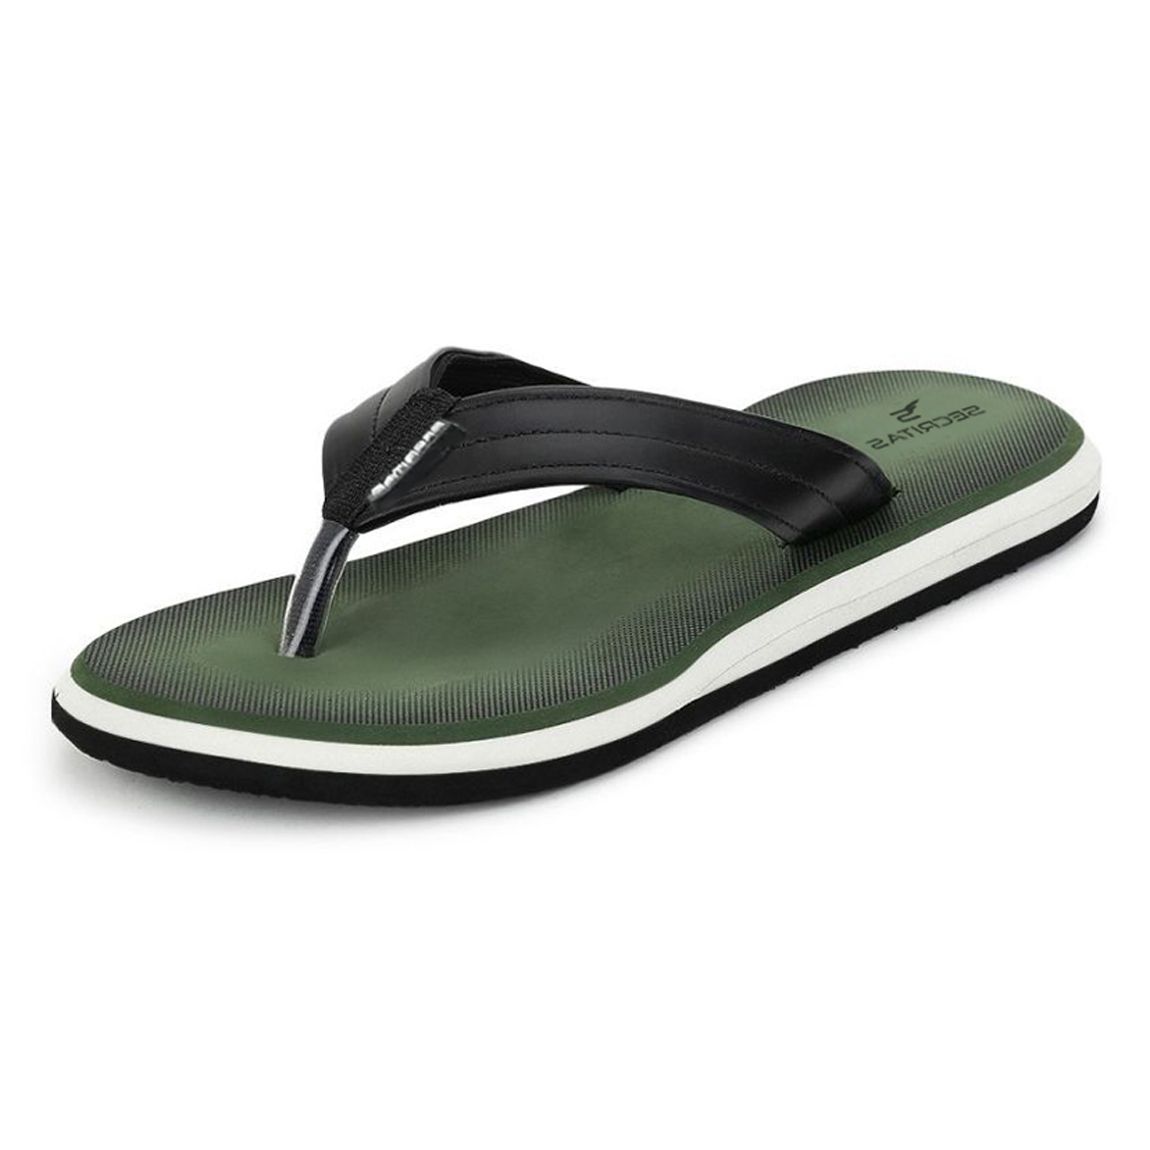 Buy Secritas Green Slippers Online at Best Price in India - Snapdeal